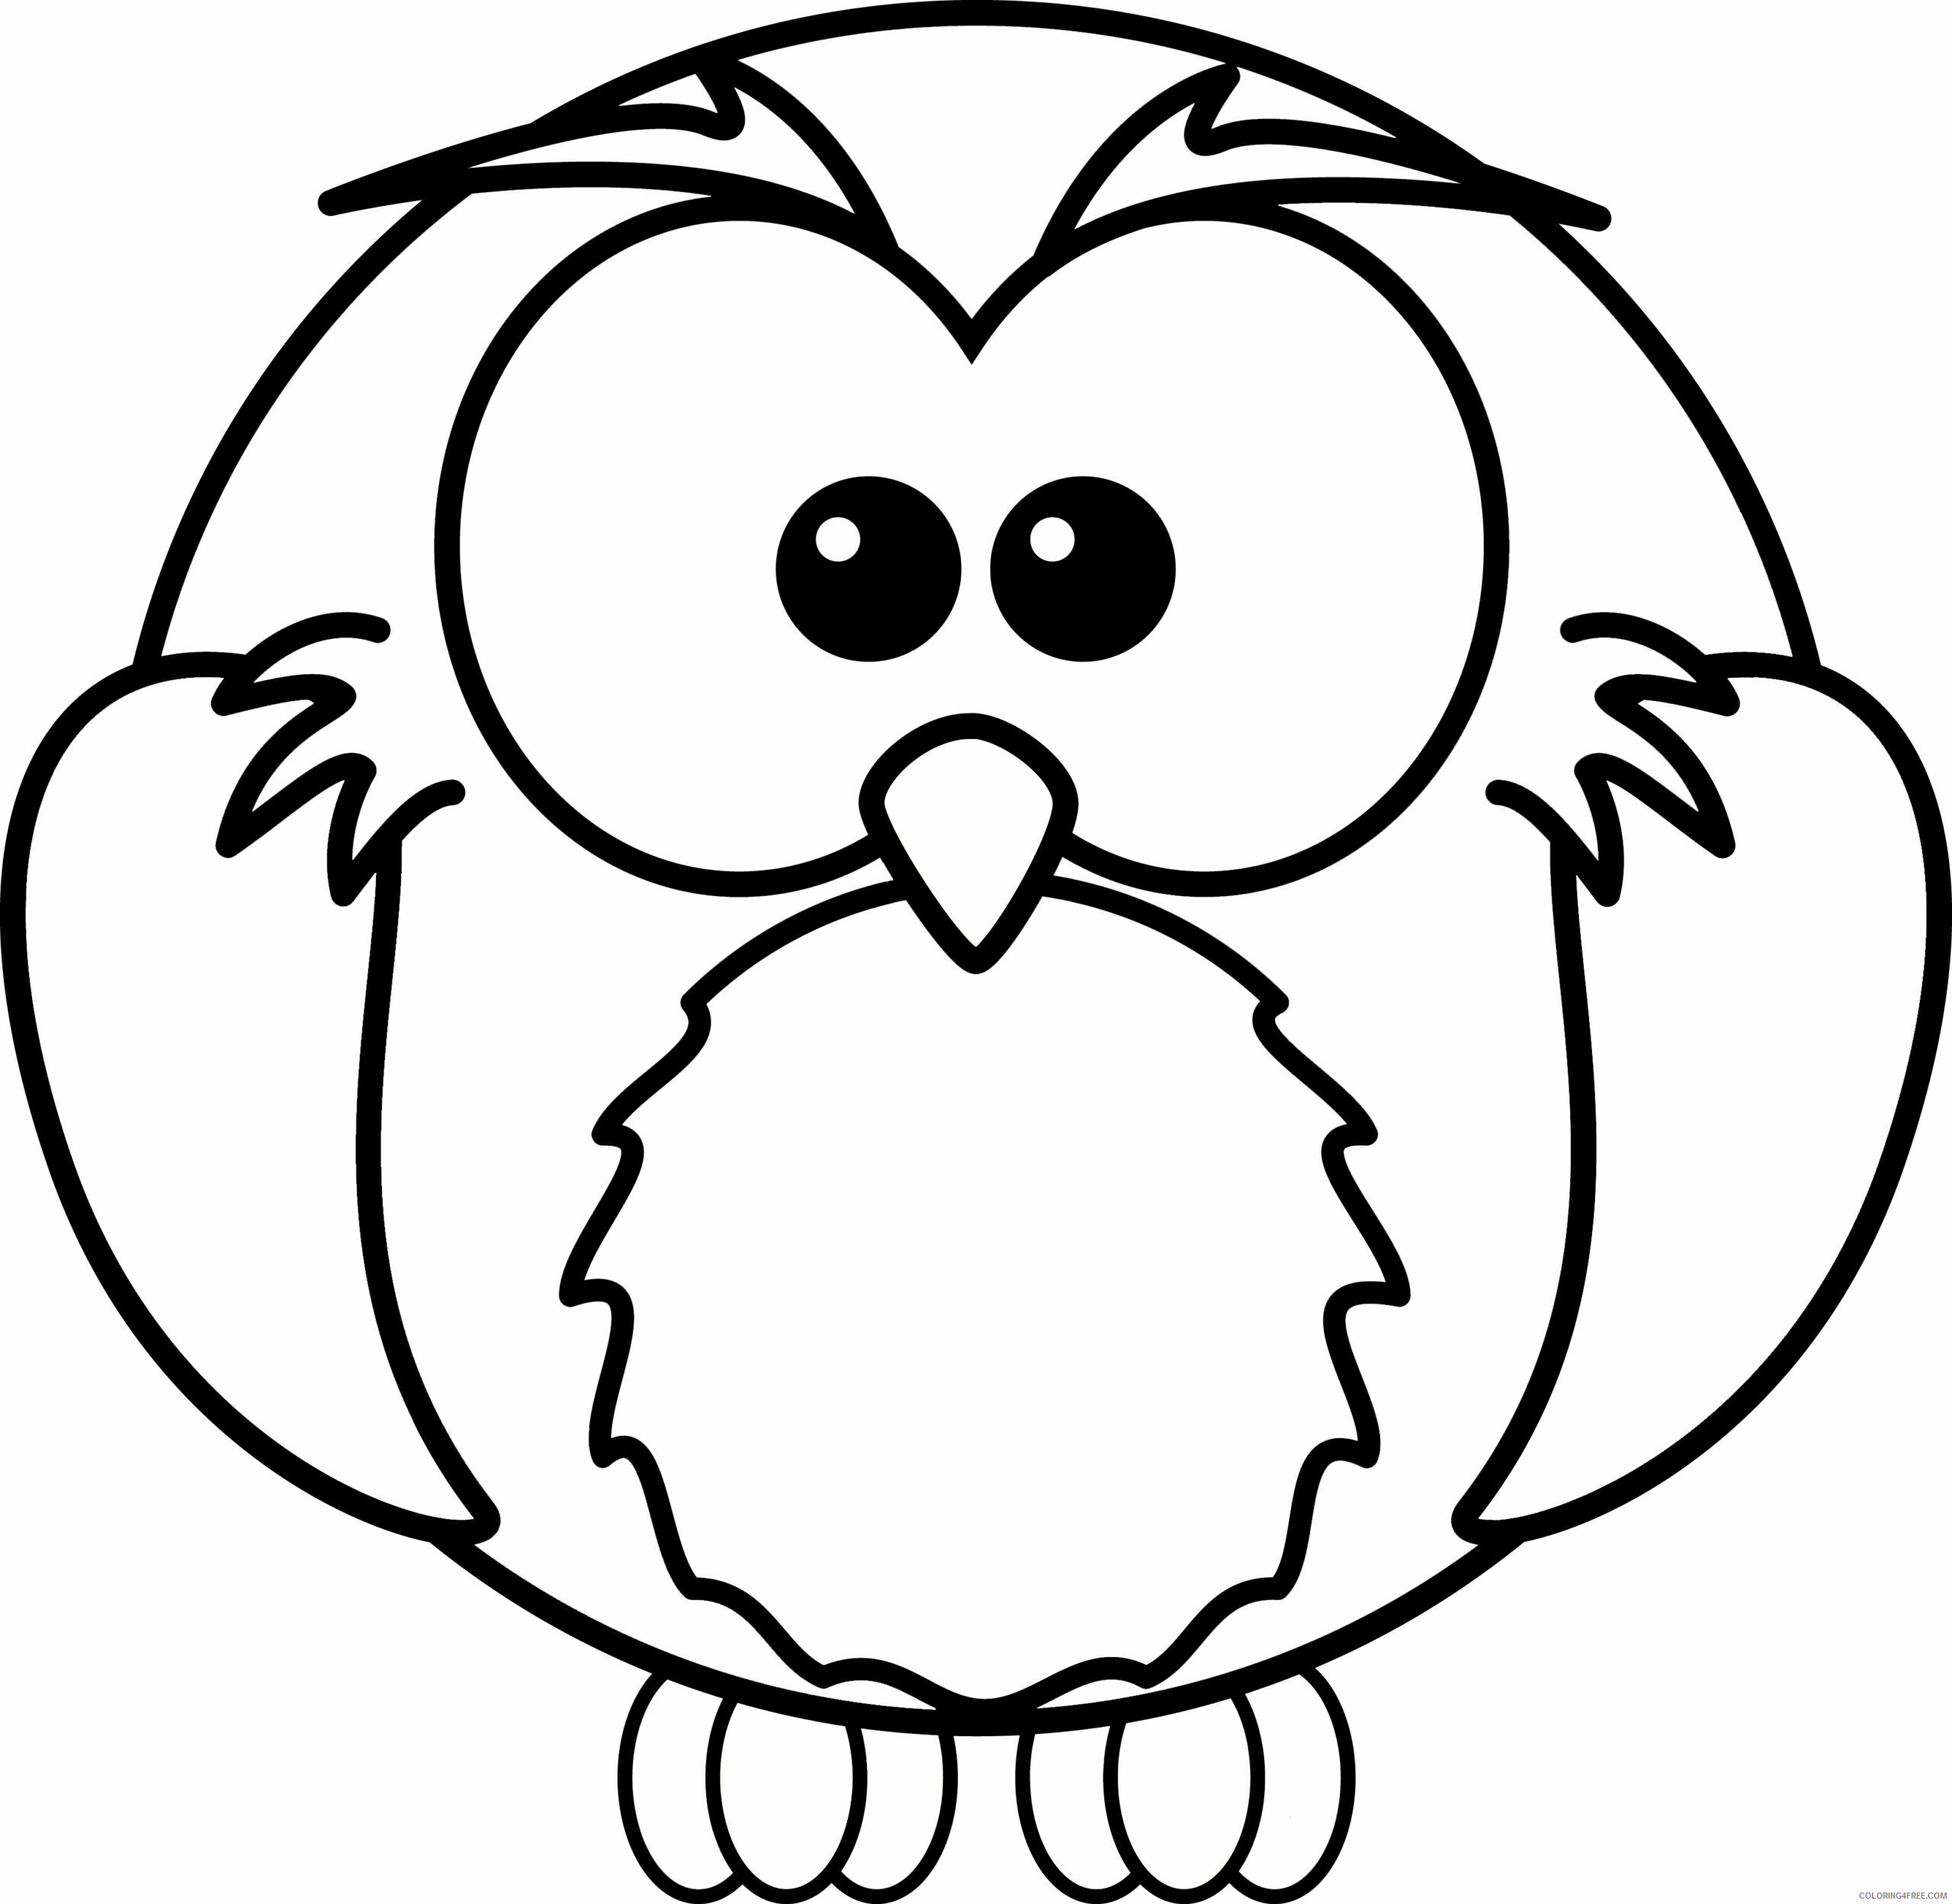 Owl Coloring Pages Animal Printable Sheets Cartoon Owl 2021 3606 Coloring4free